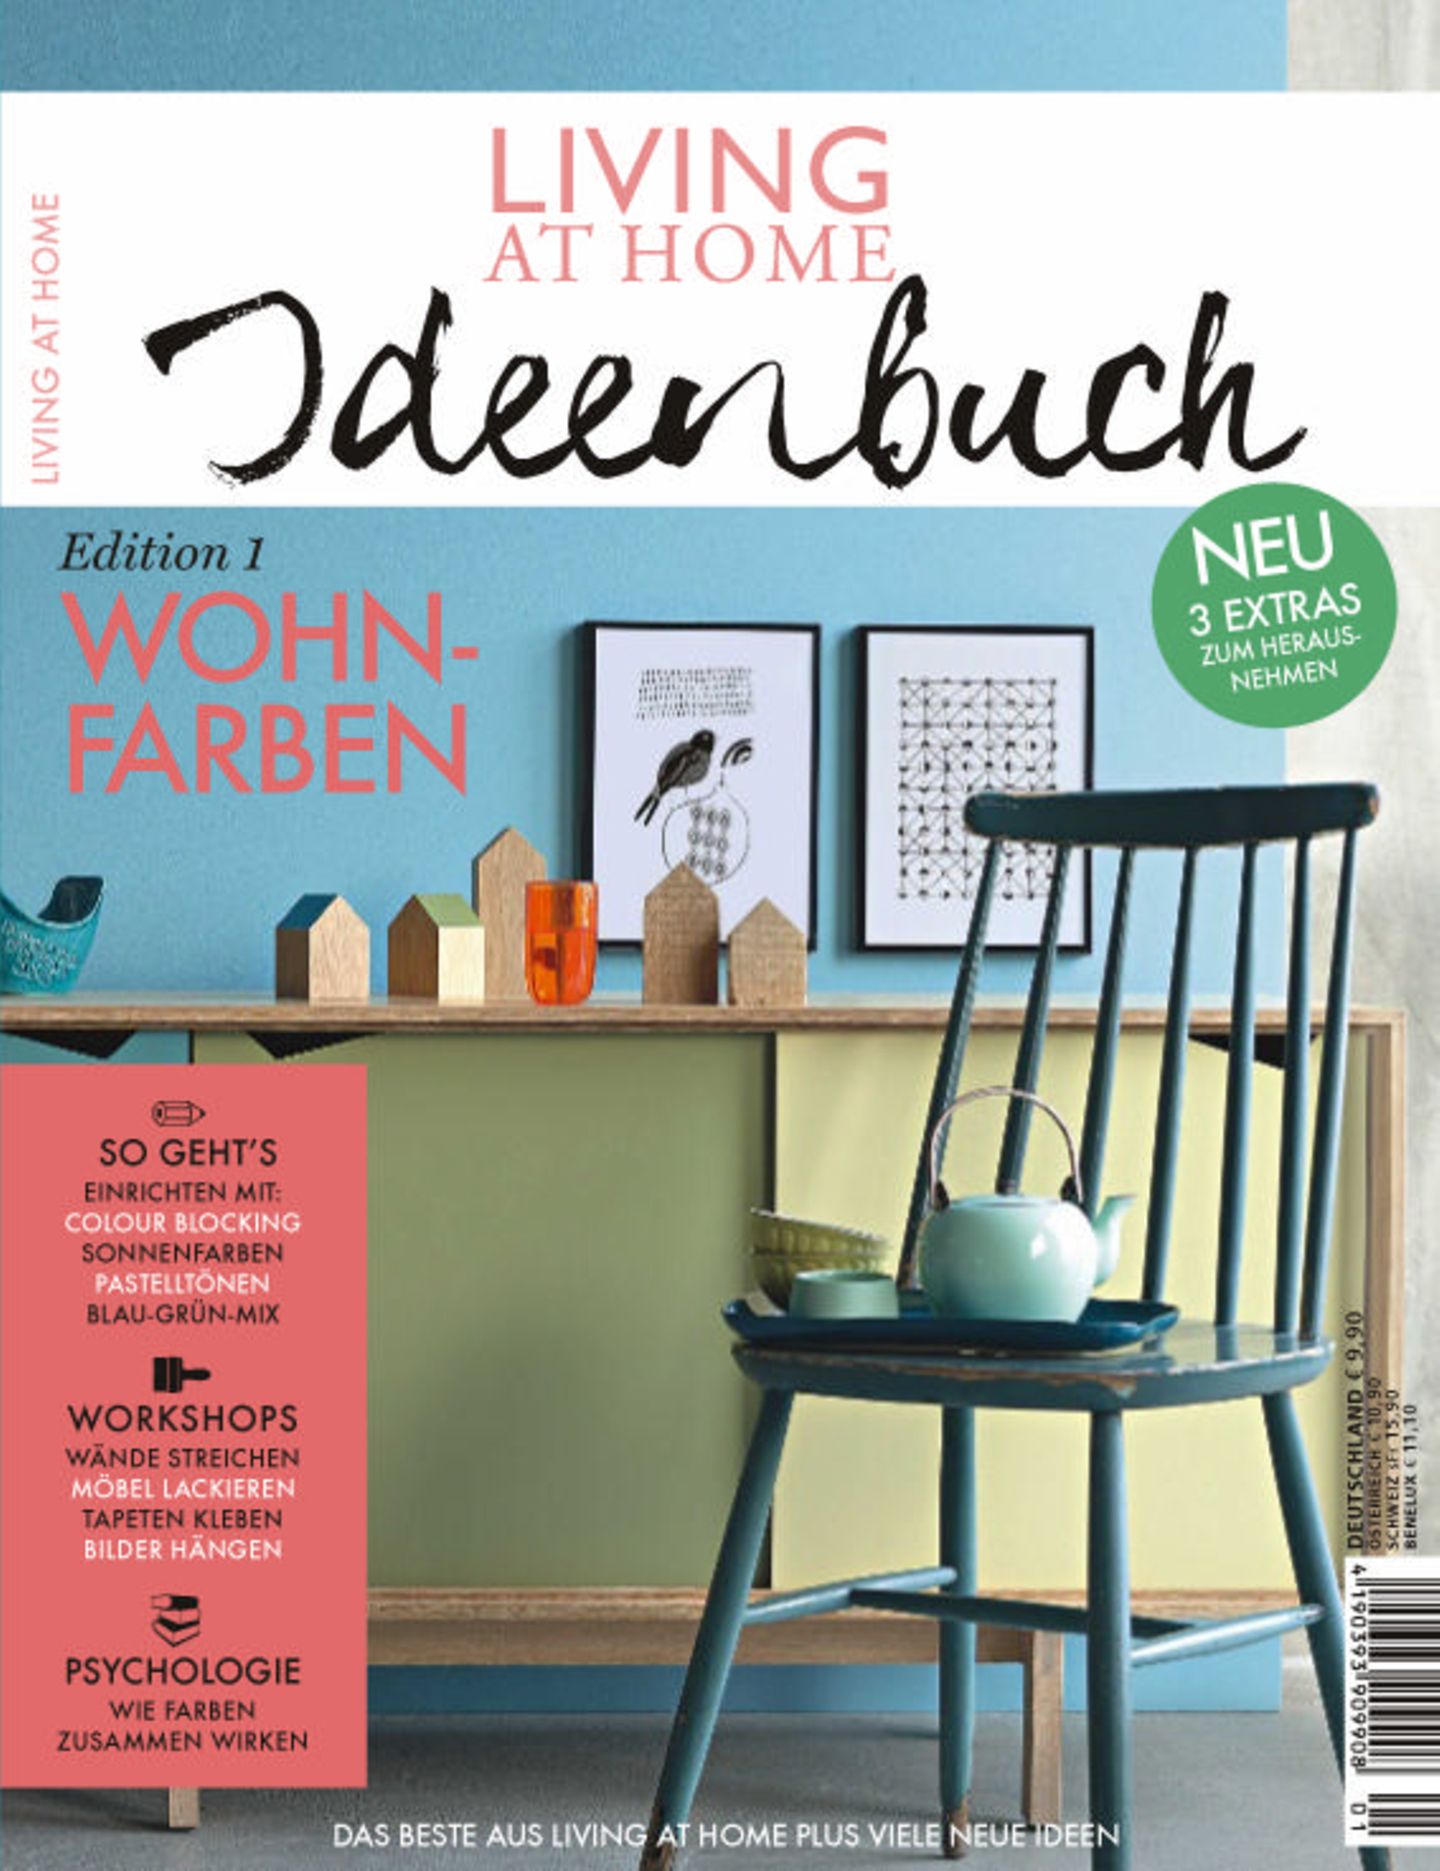 LIVING AT HOME Ideenbuch Edition 1